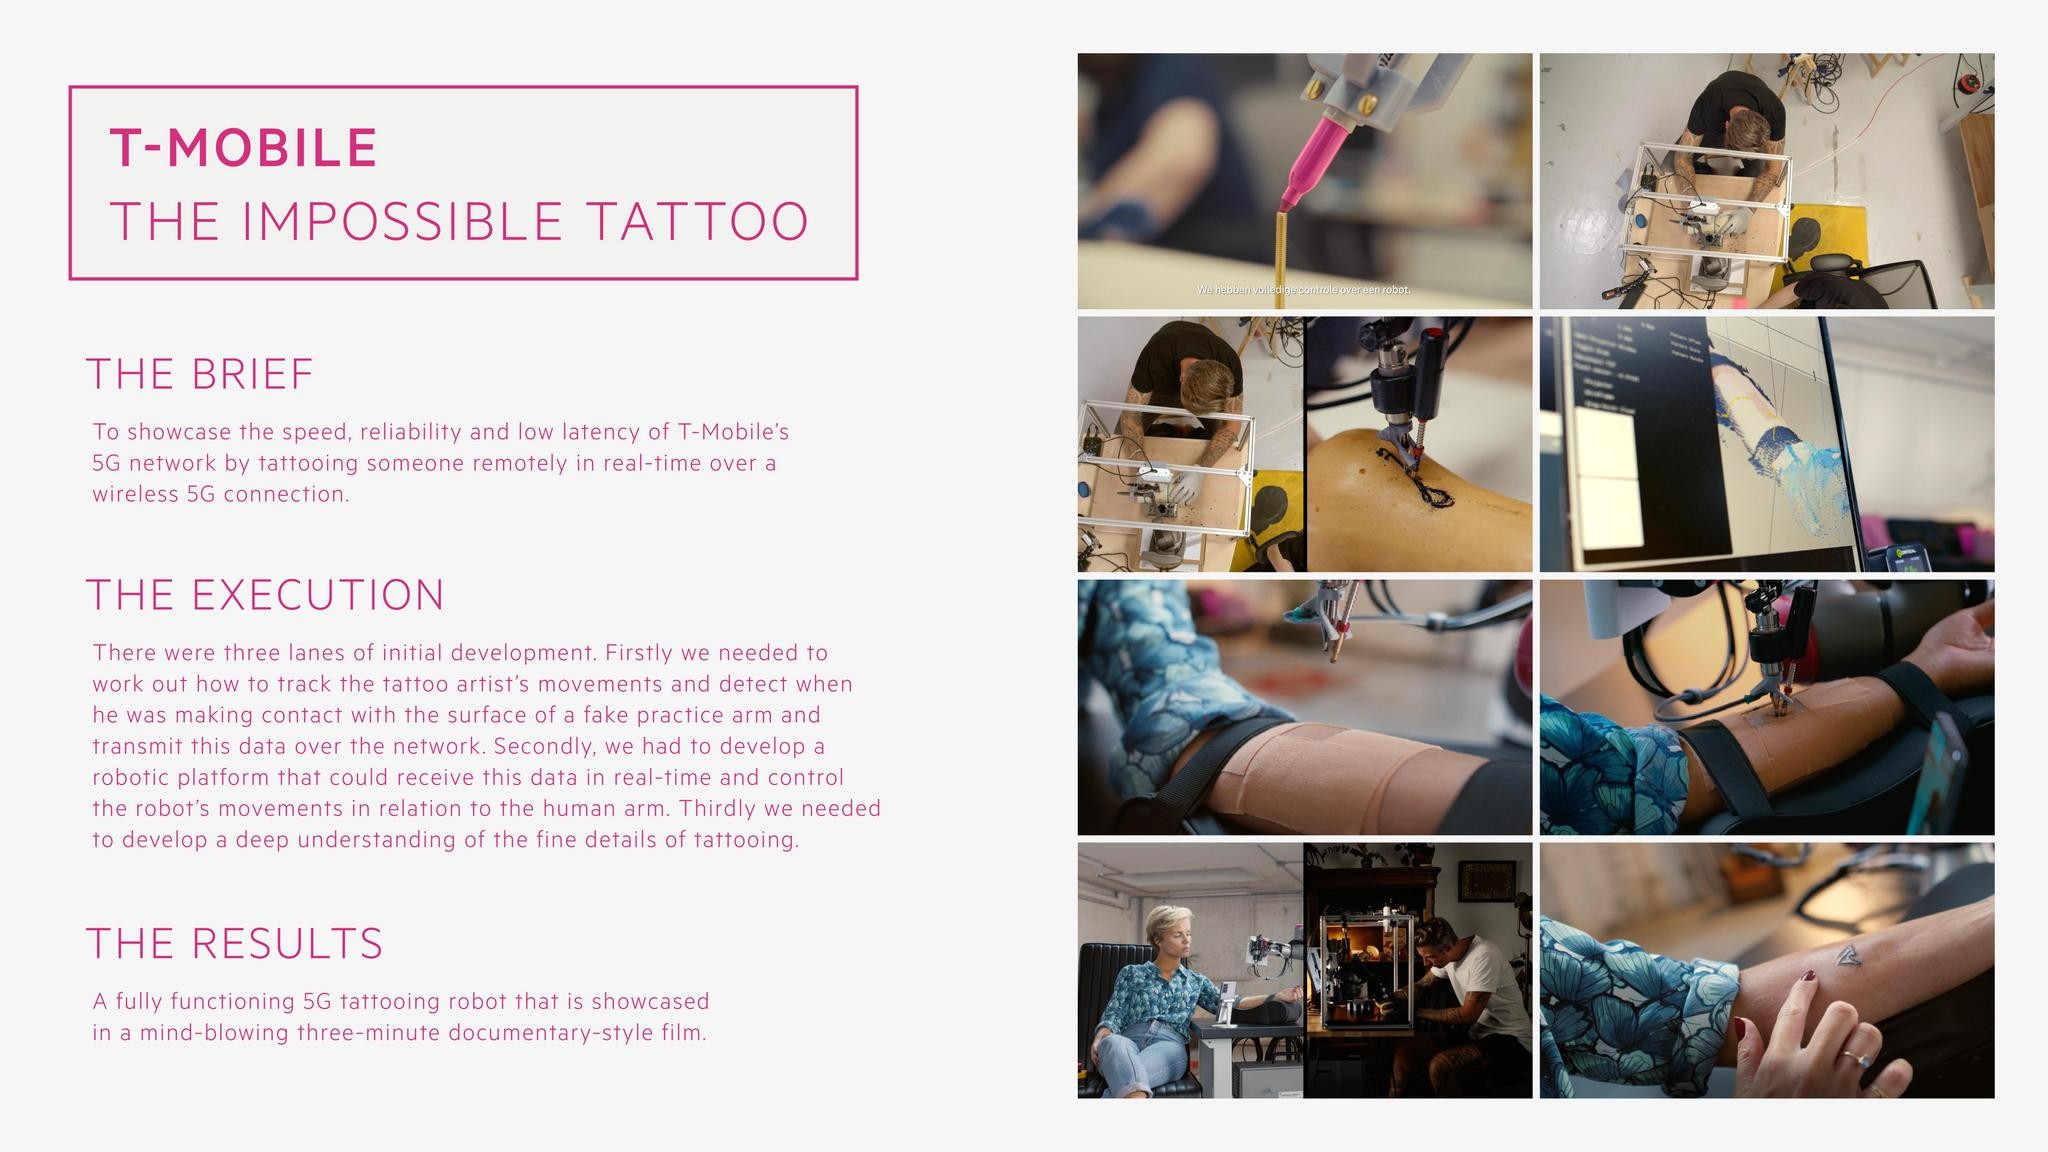 T-Mobile 'The Impossible Tattoo'